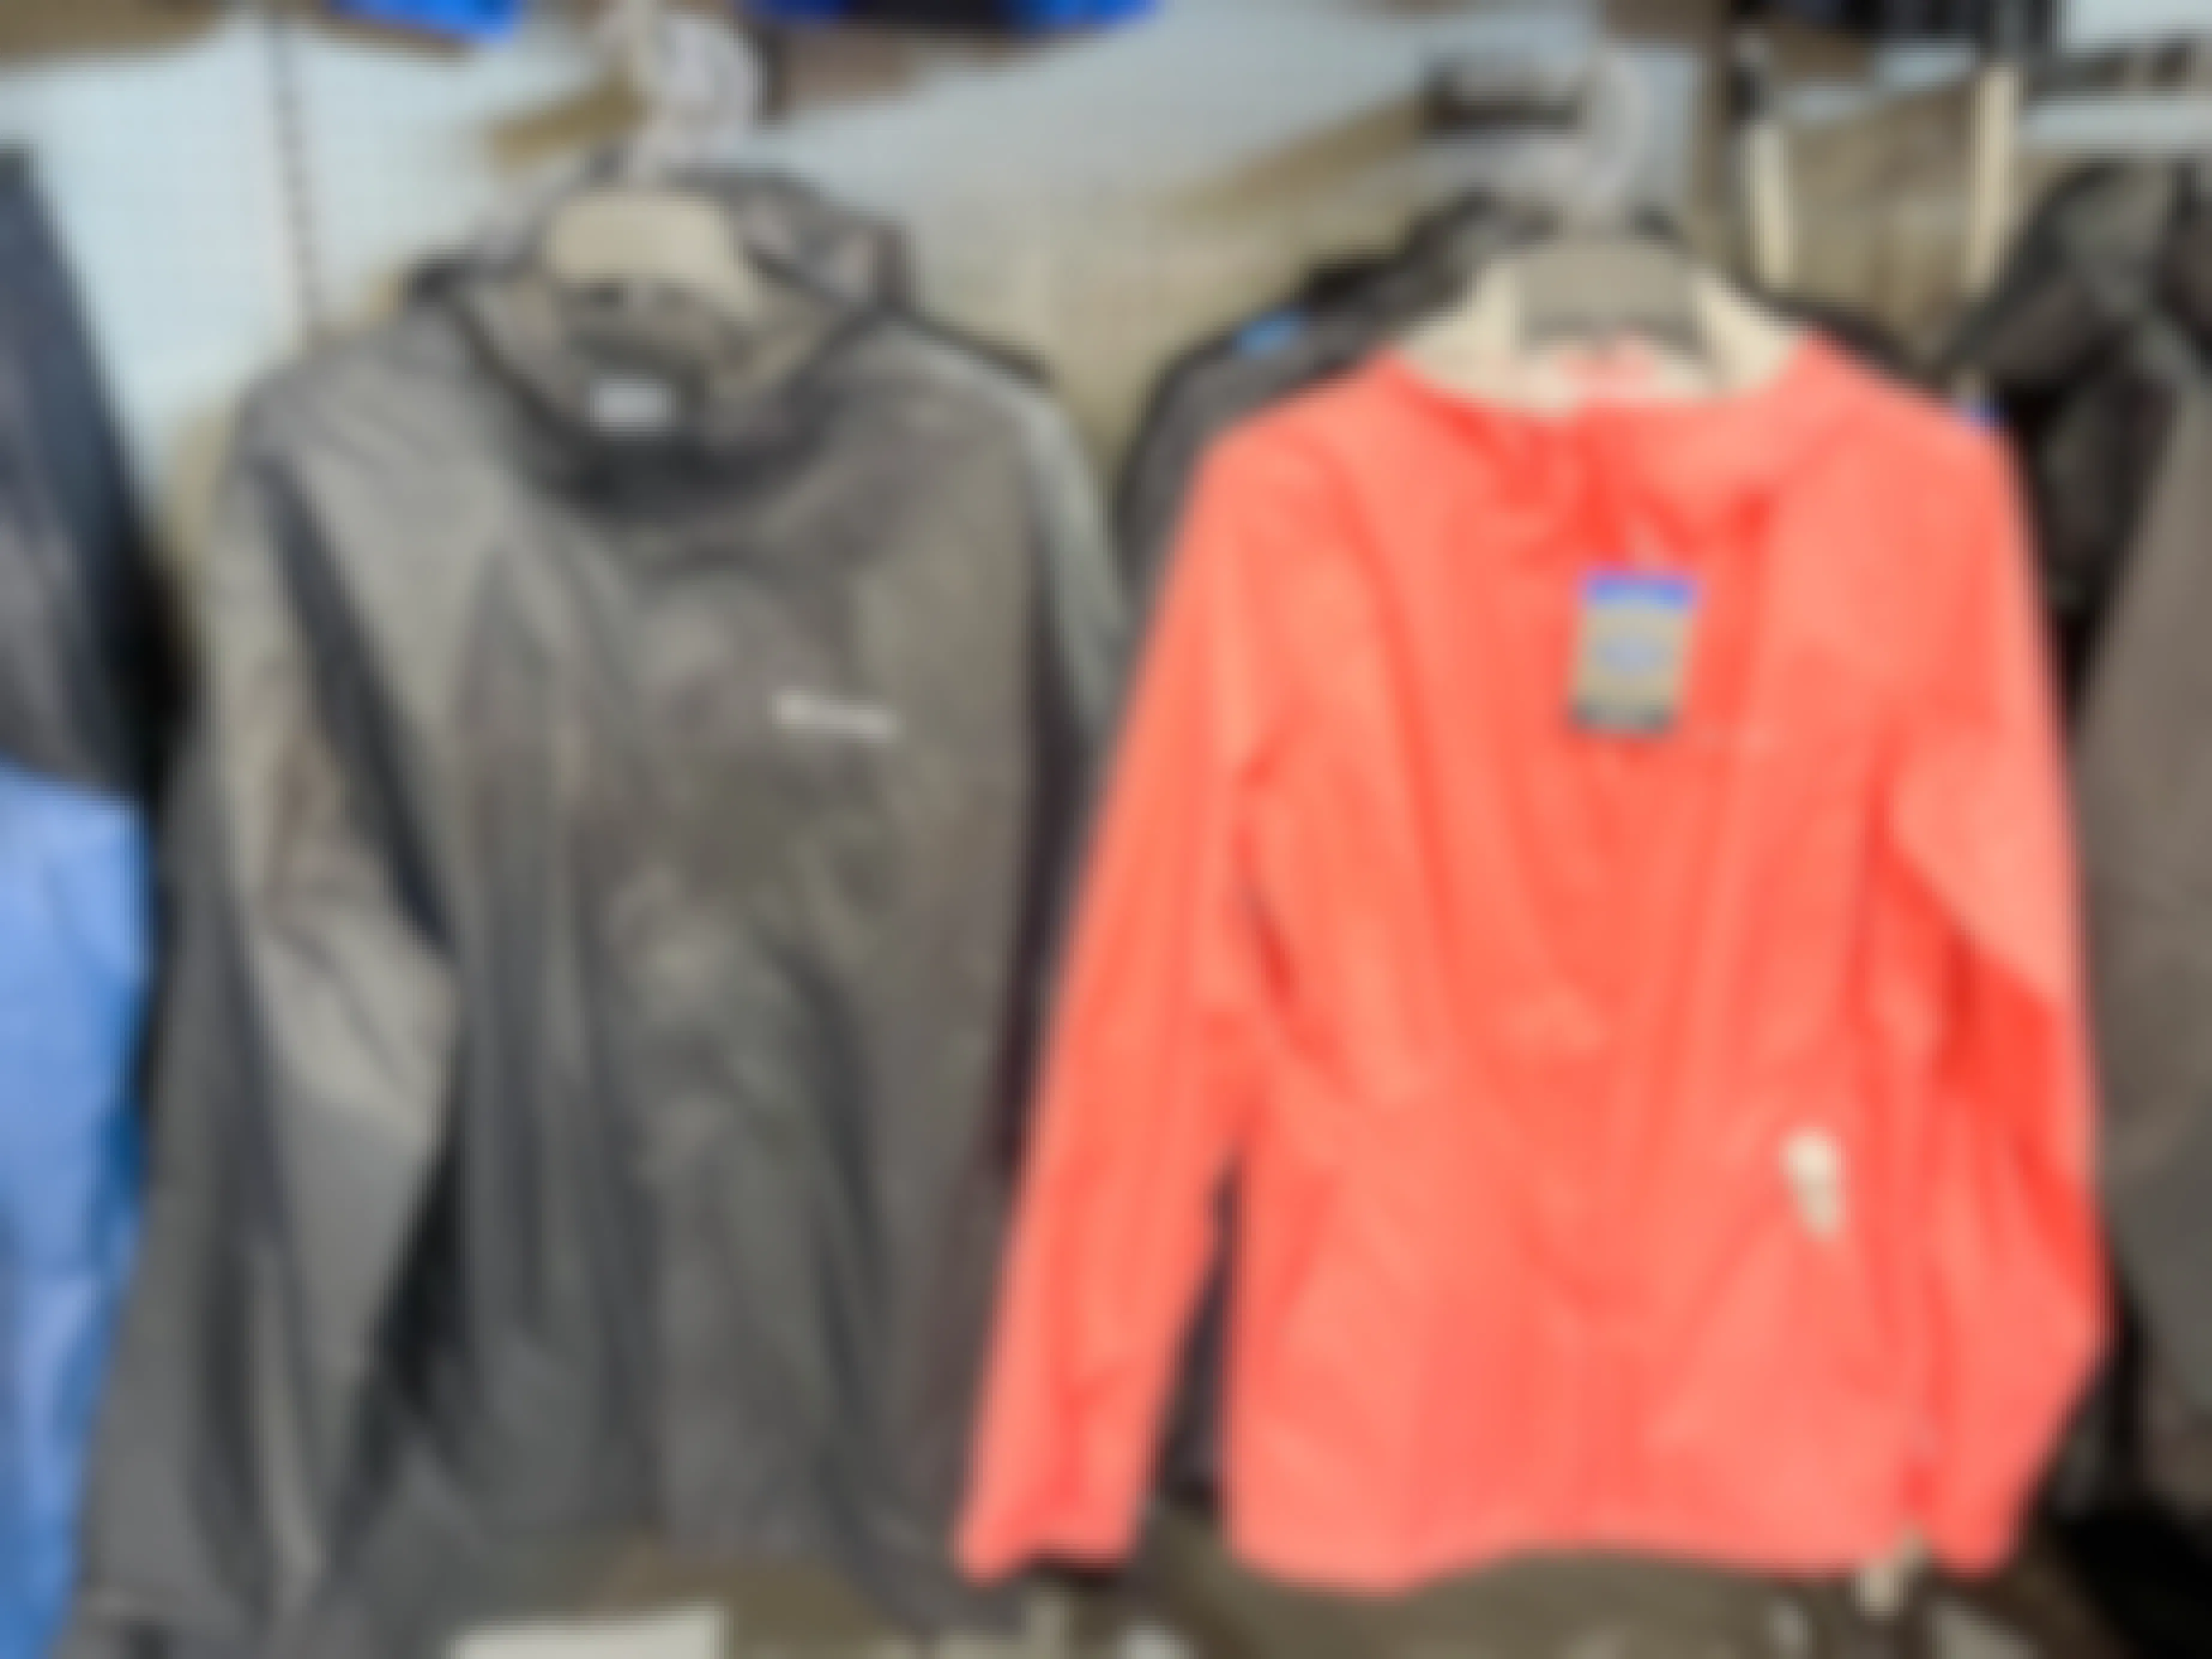 Columbia jackets hanging on racks. One is a mens in black, the other is a womans in coral.